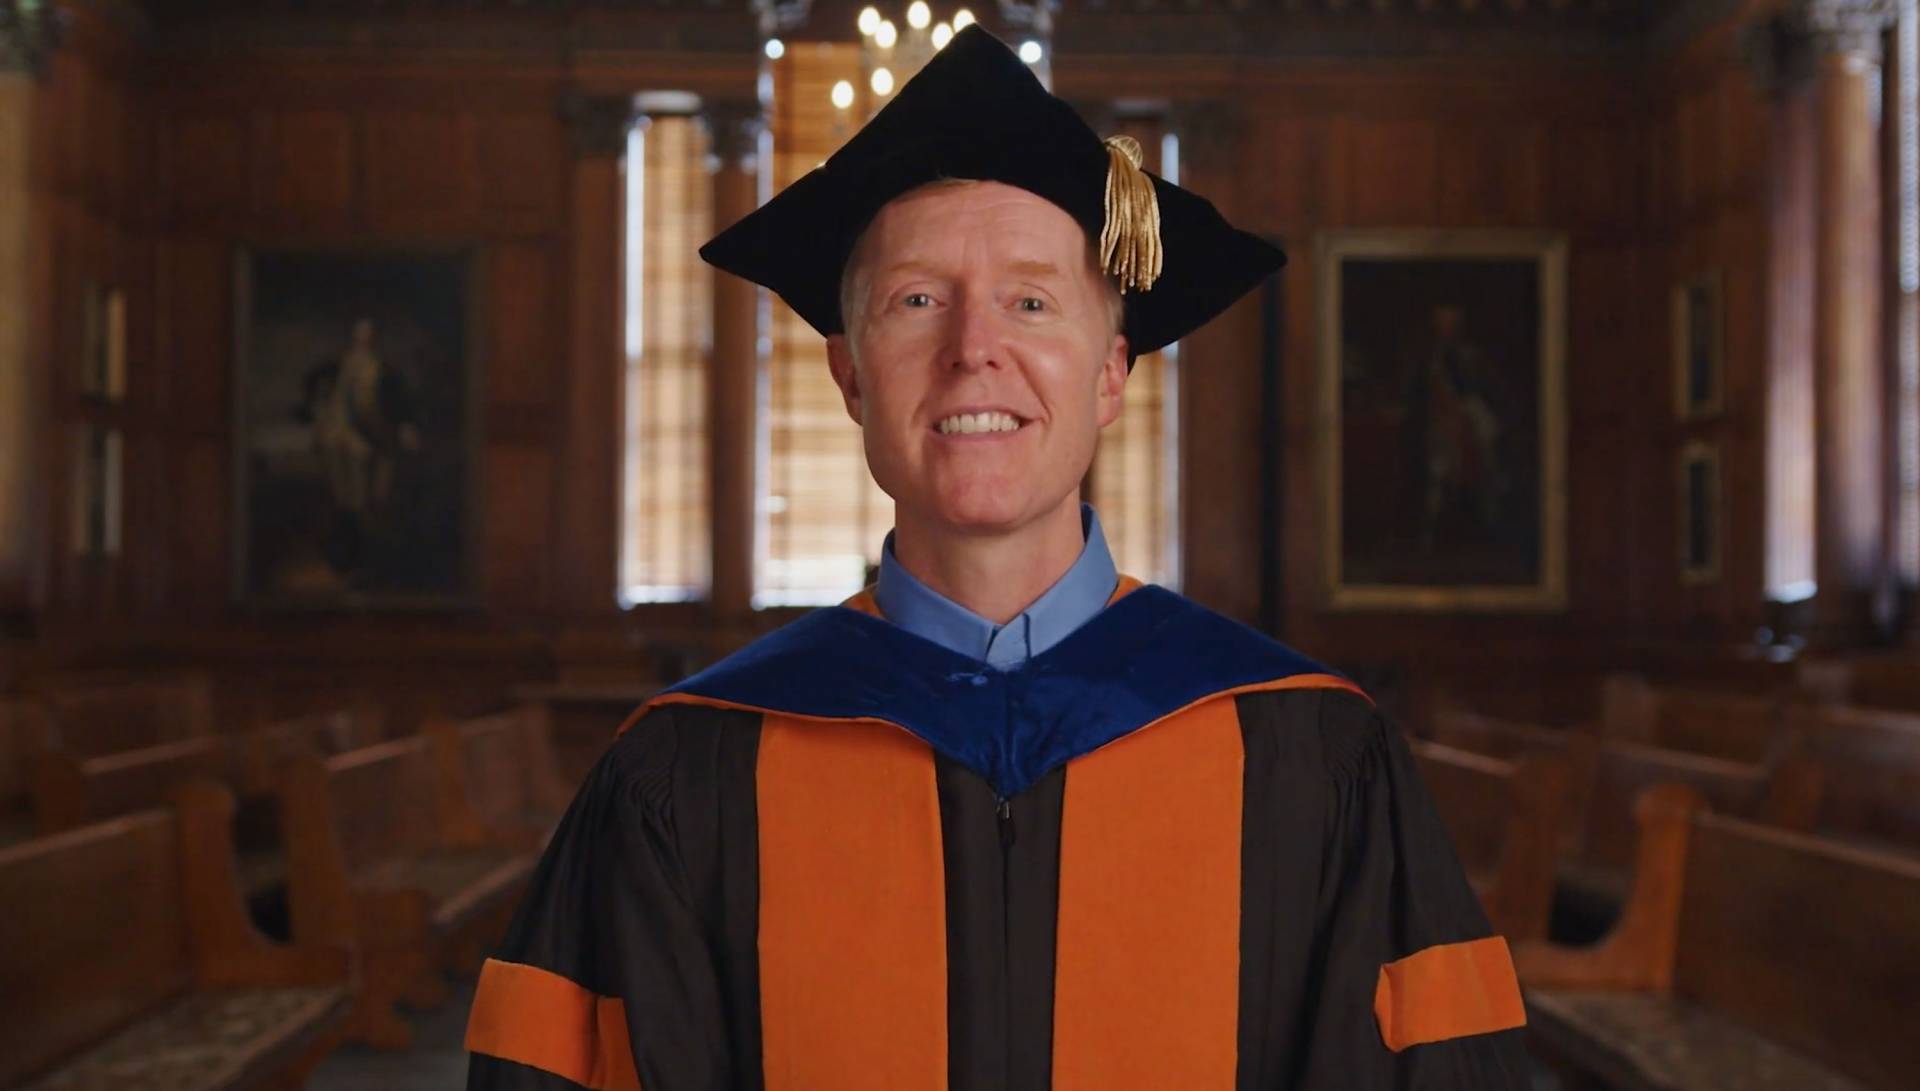 Princeton Recognizes Advanced Degree Recipients In A Time Of Unprecedented Challenges